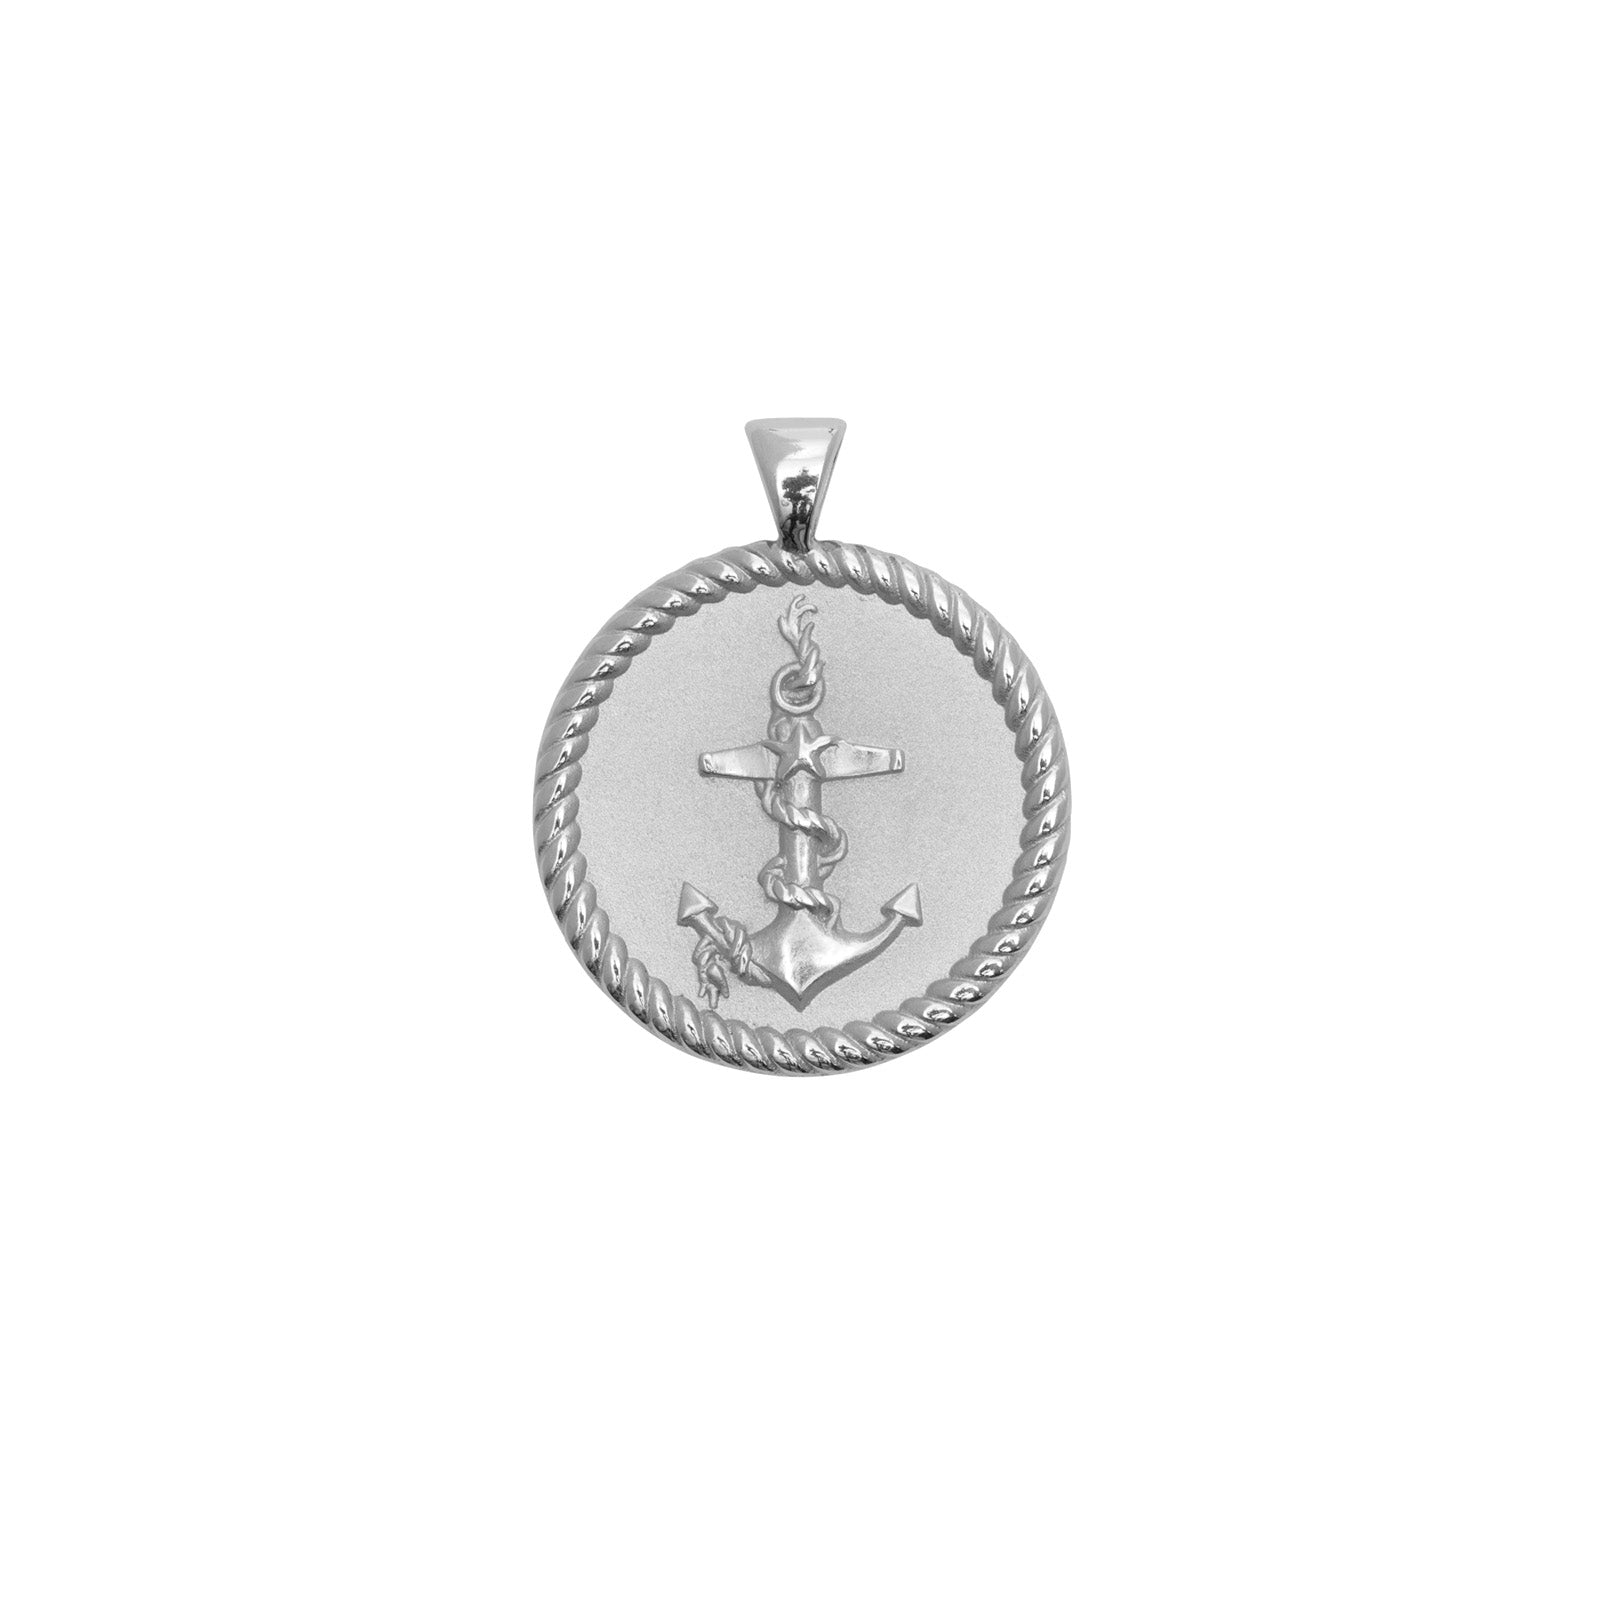 STRONG JW Small Pendant Coin in Silver